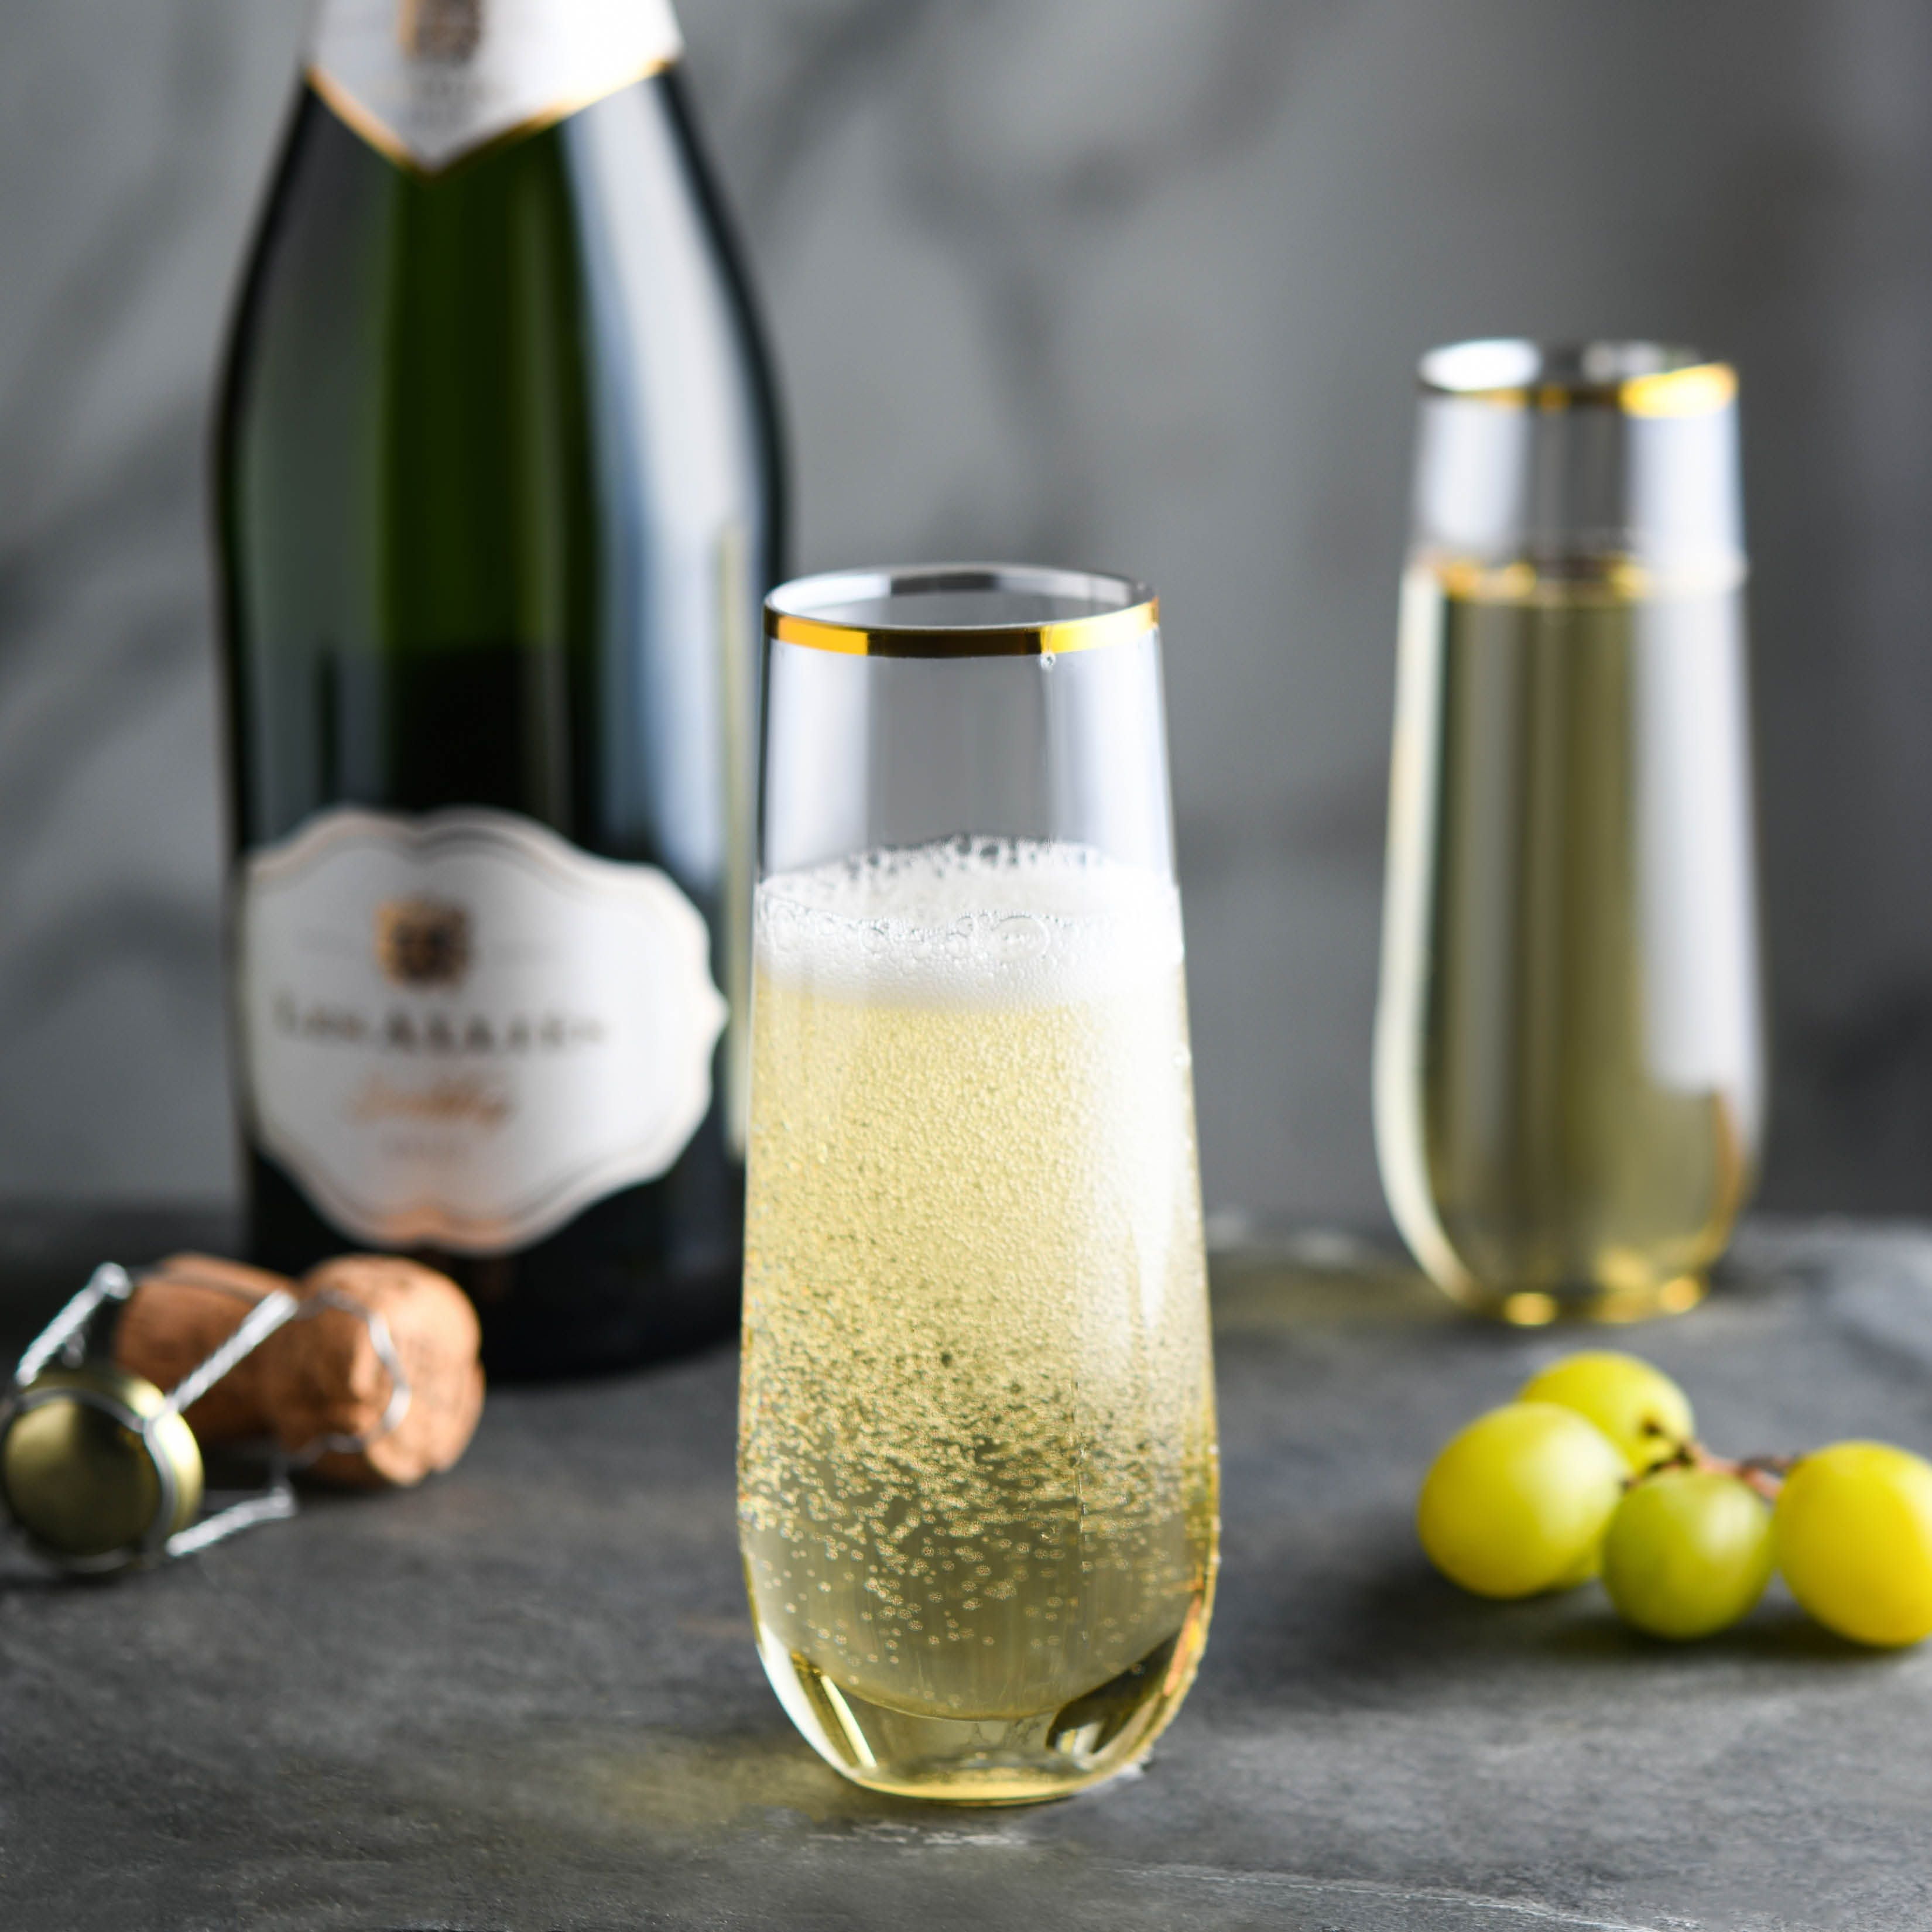 Vinglacé Stainless Steel Stemless Champagne Flute- Insulated  Sparkling Wine Tumbler with Glass Insert, 6 oz, Sea Glass: Champagne Glasses